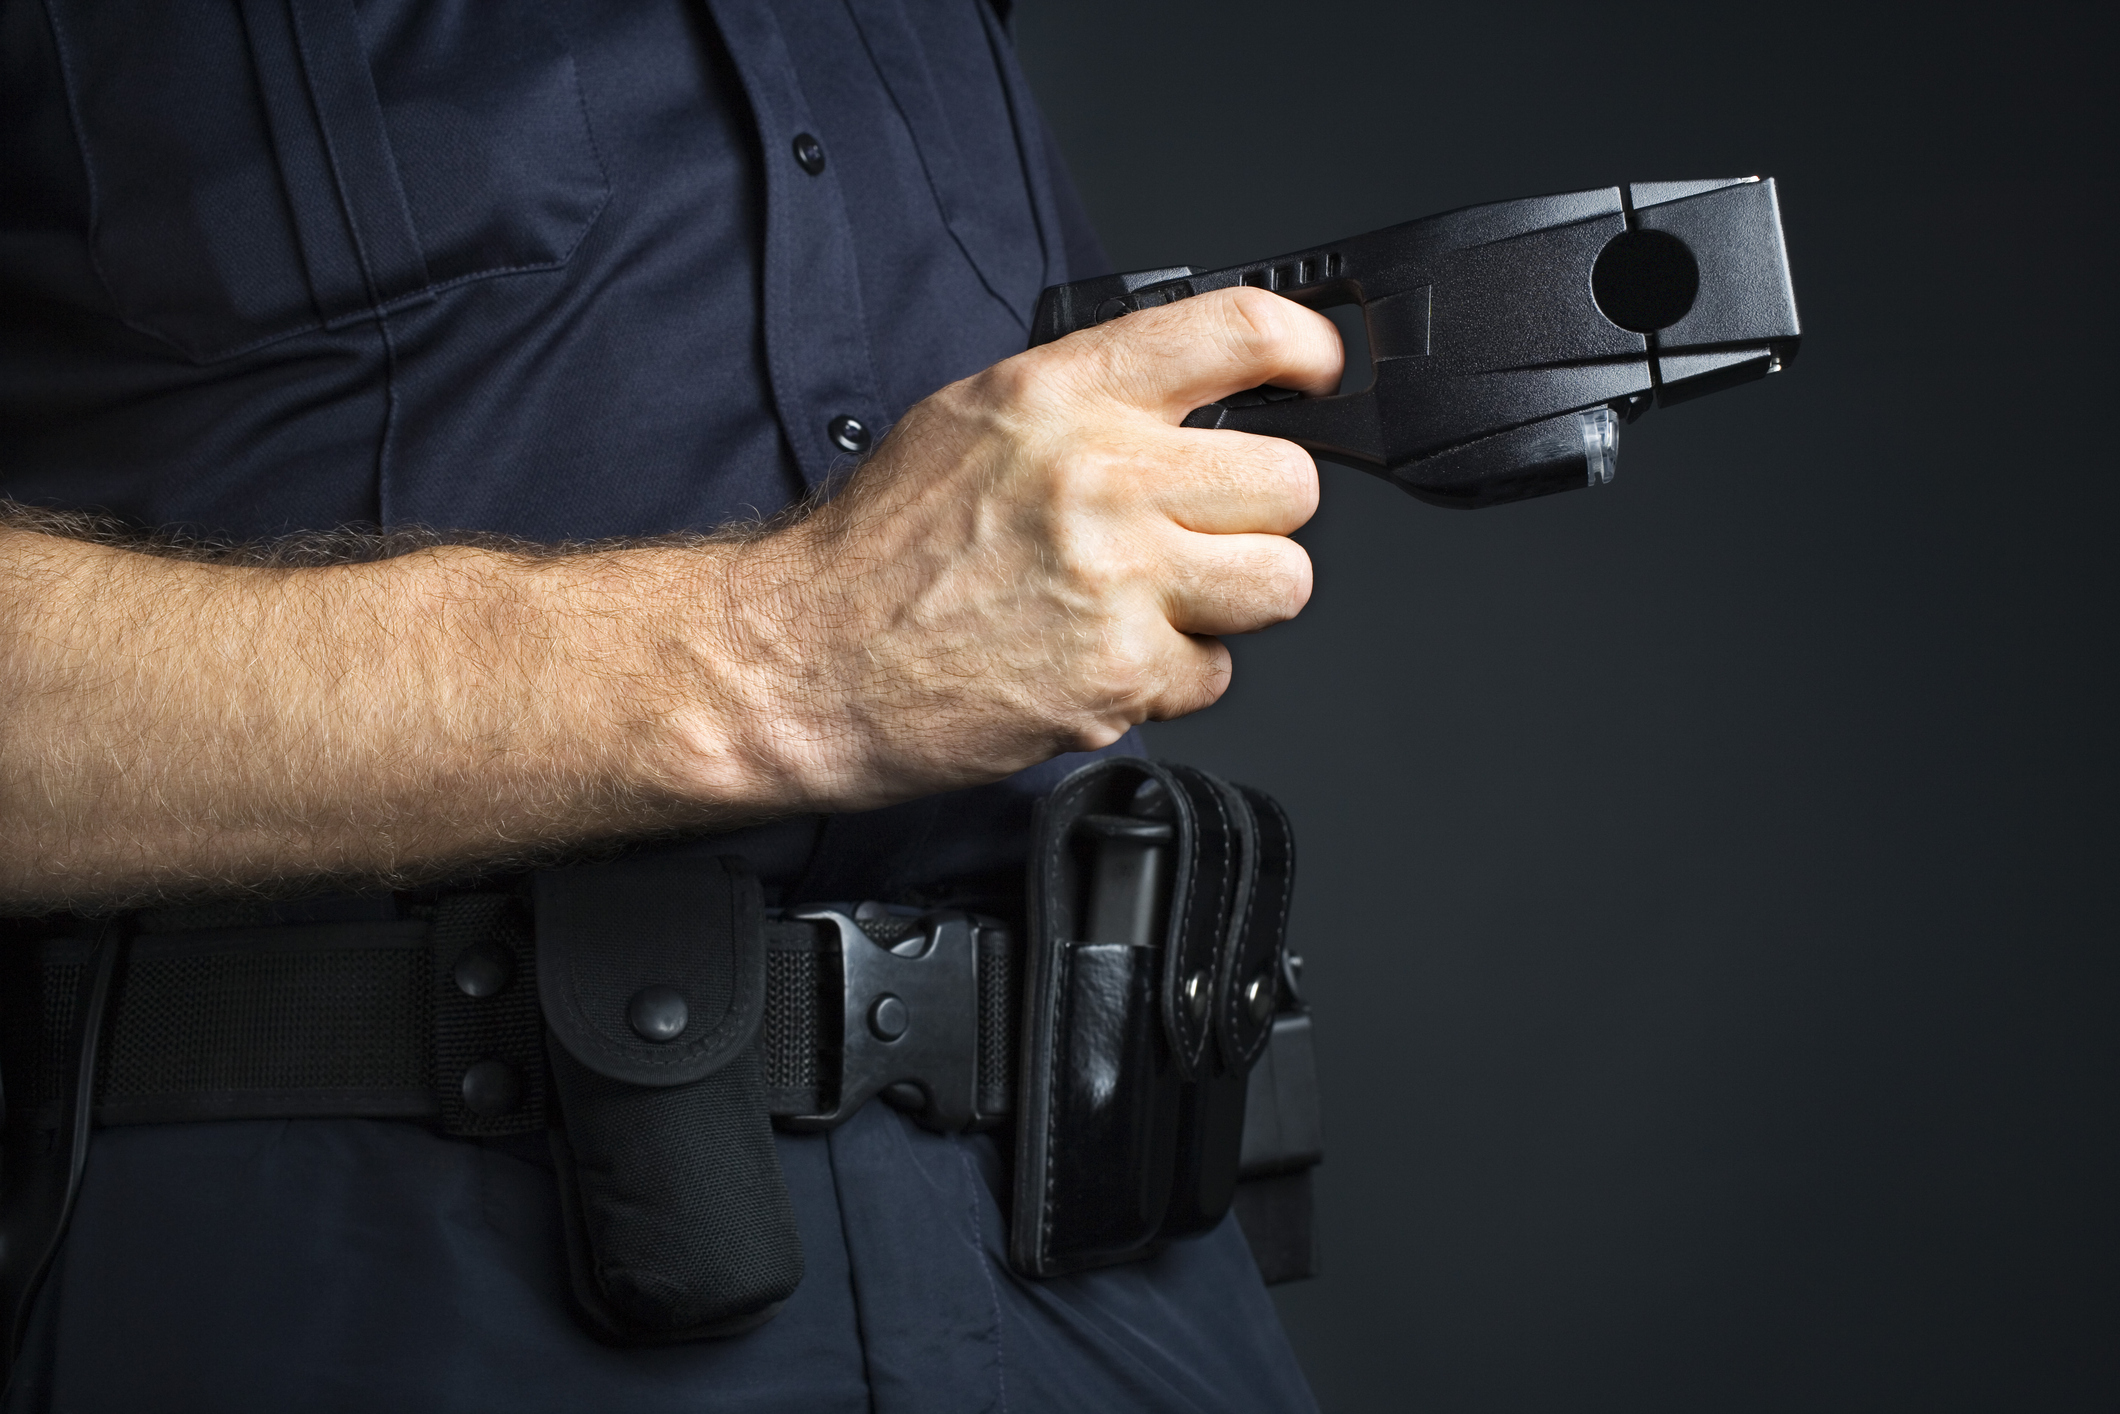 PHOTO: A taser gun is pictured in this undated stock photo.